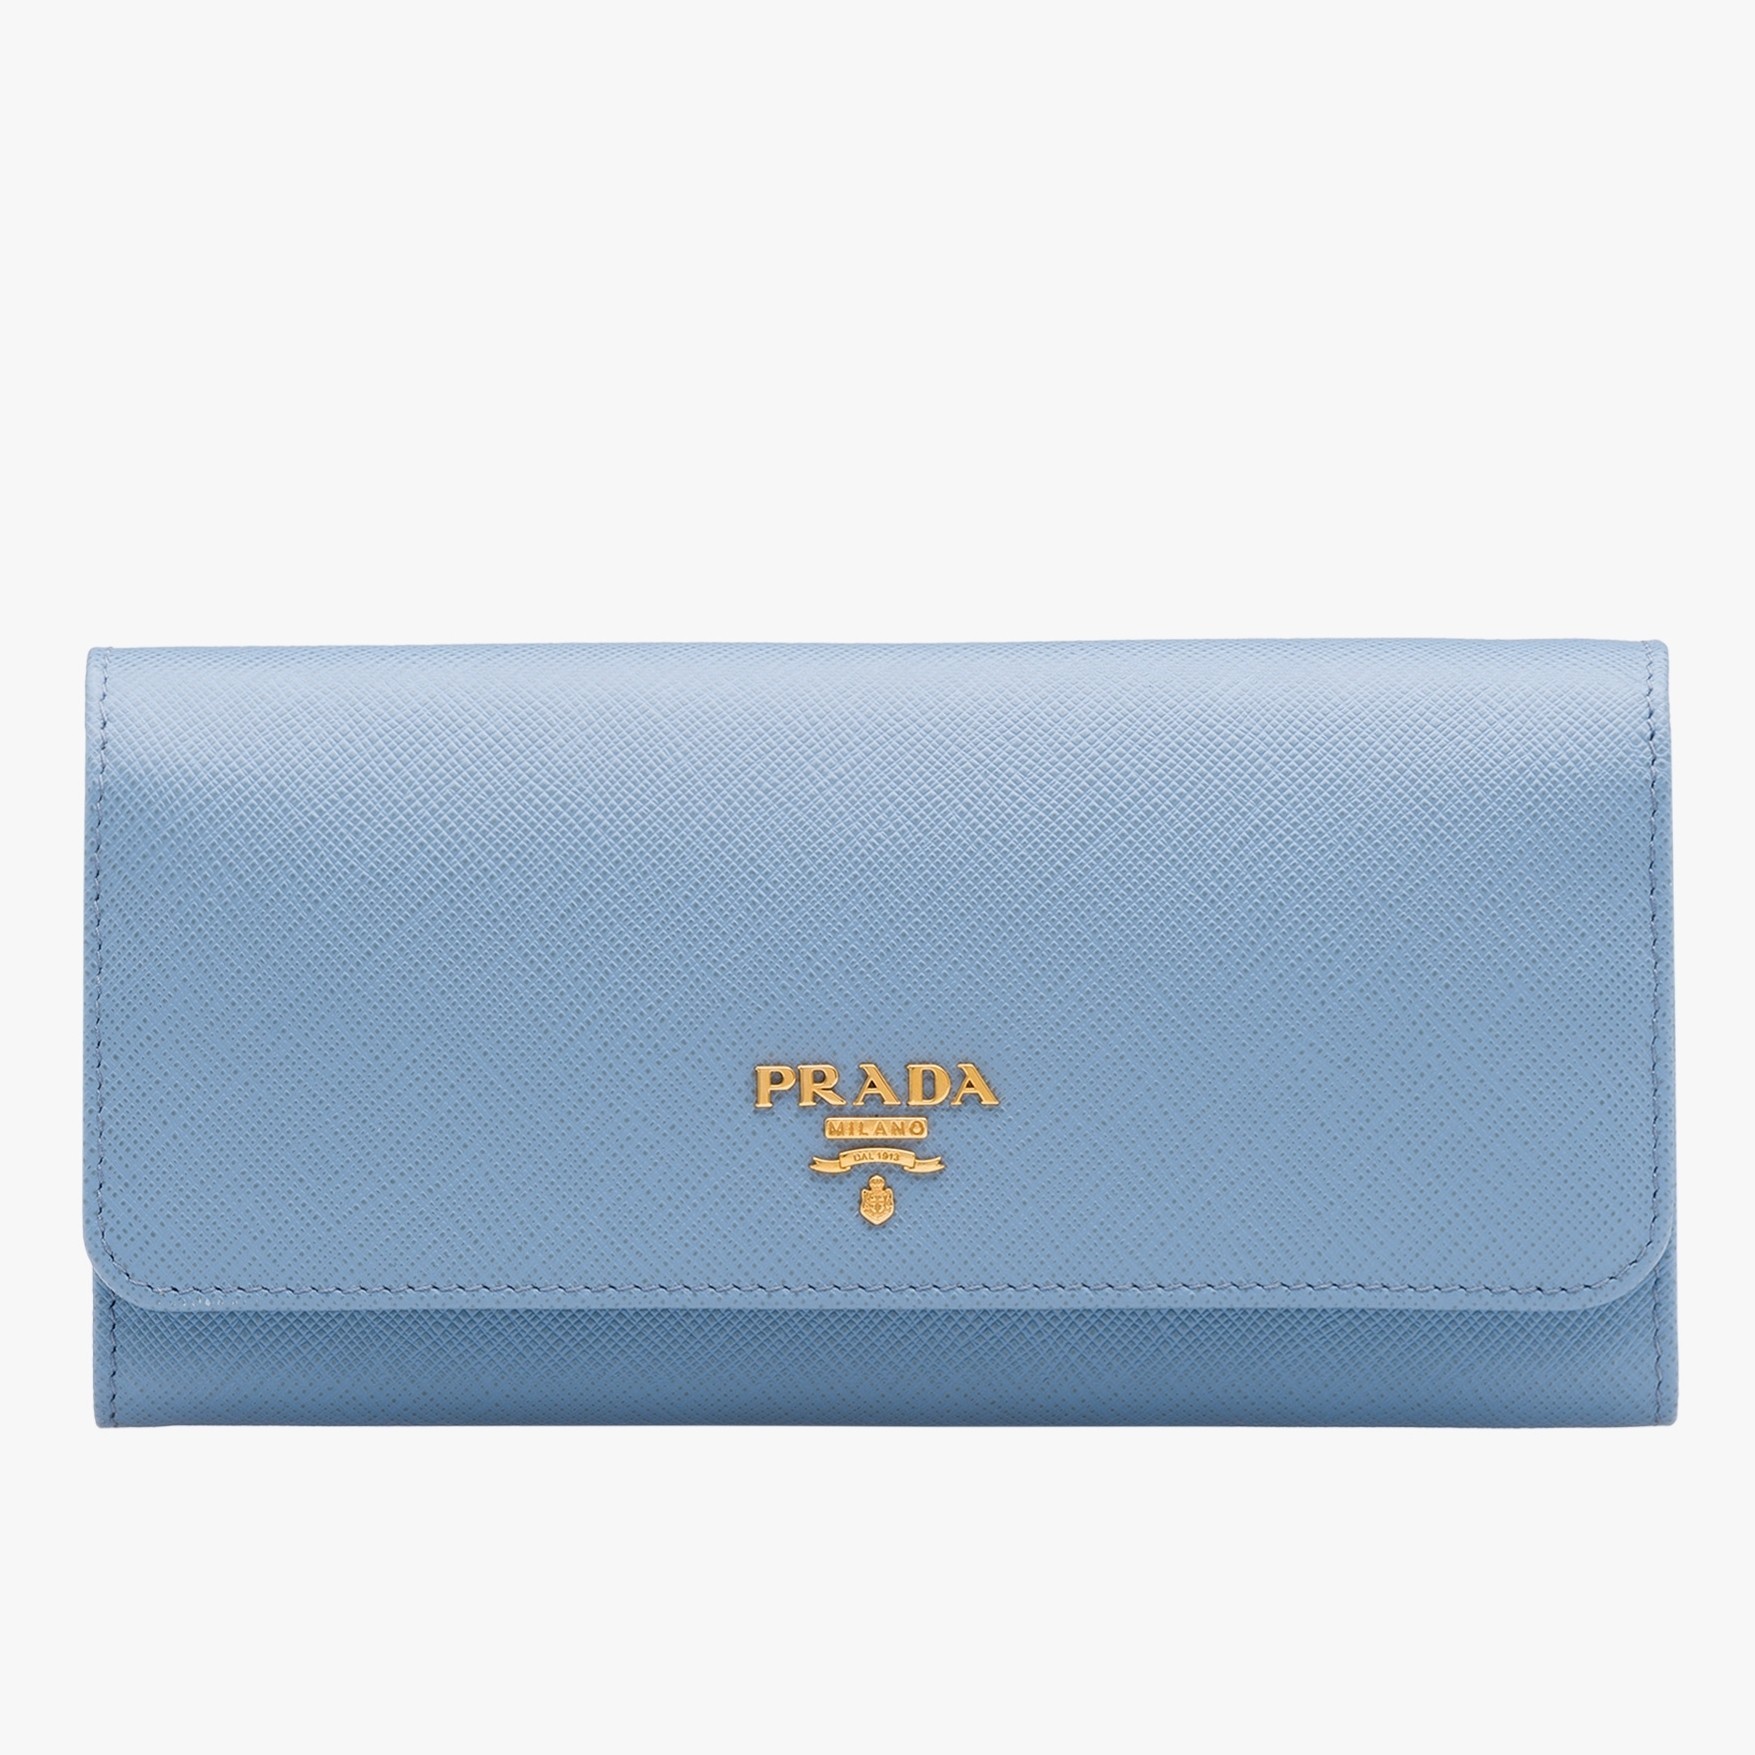 Prada Continental Wallet In Light Blue Saffiano Leather 101